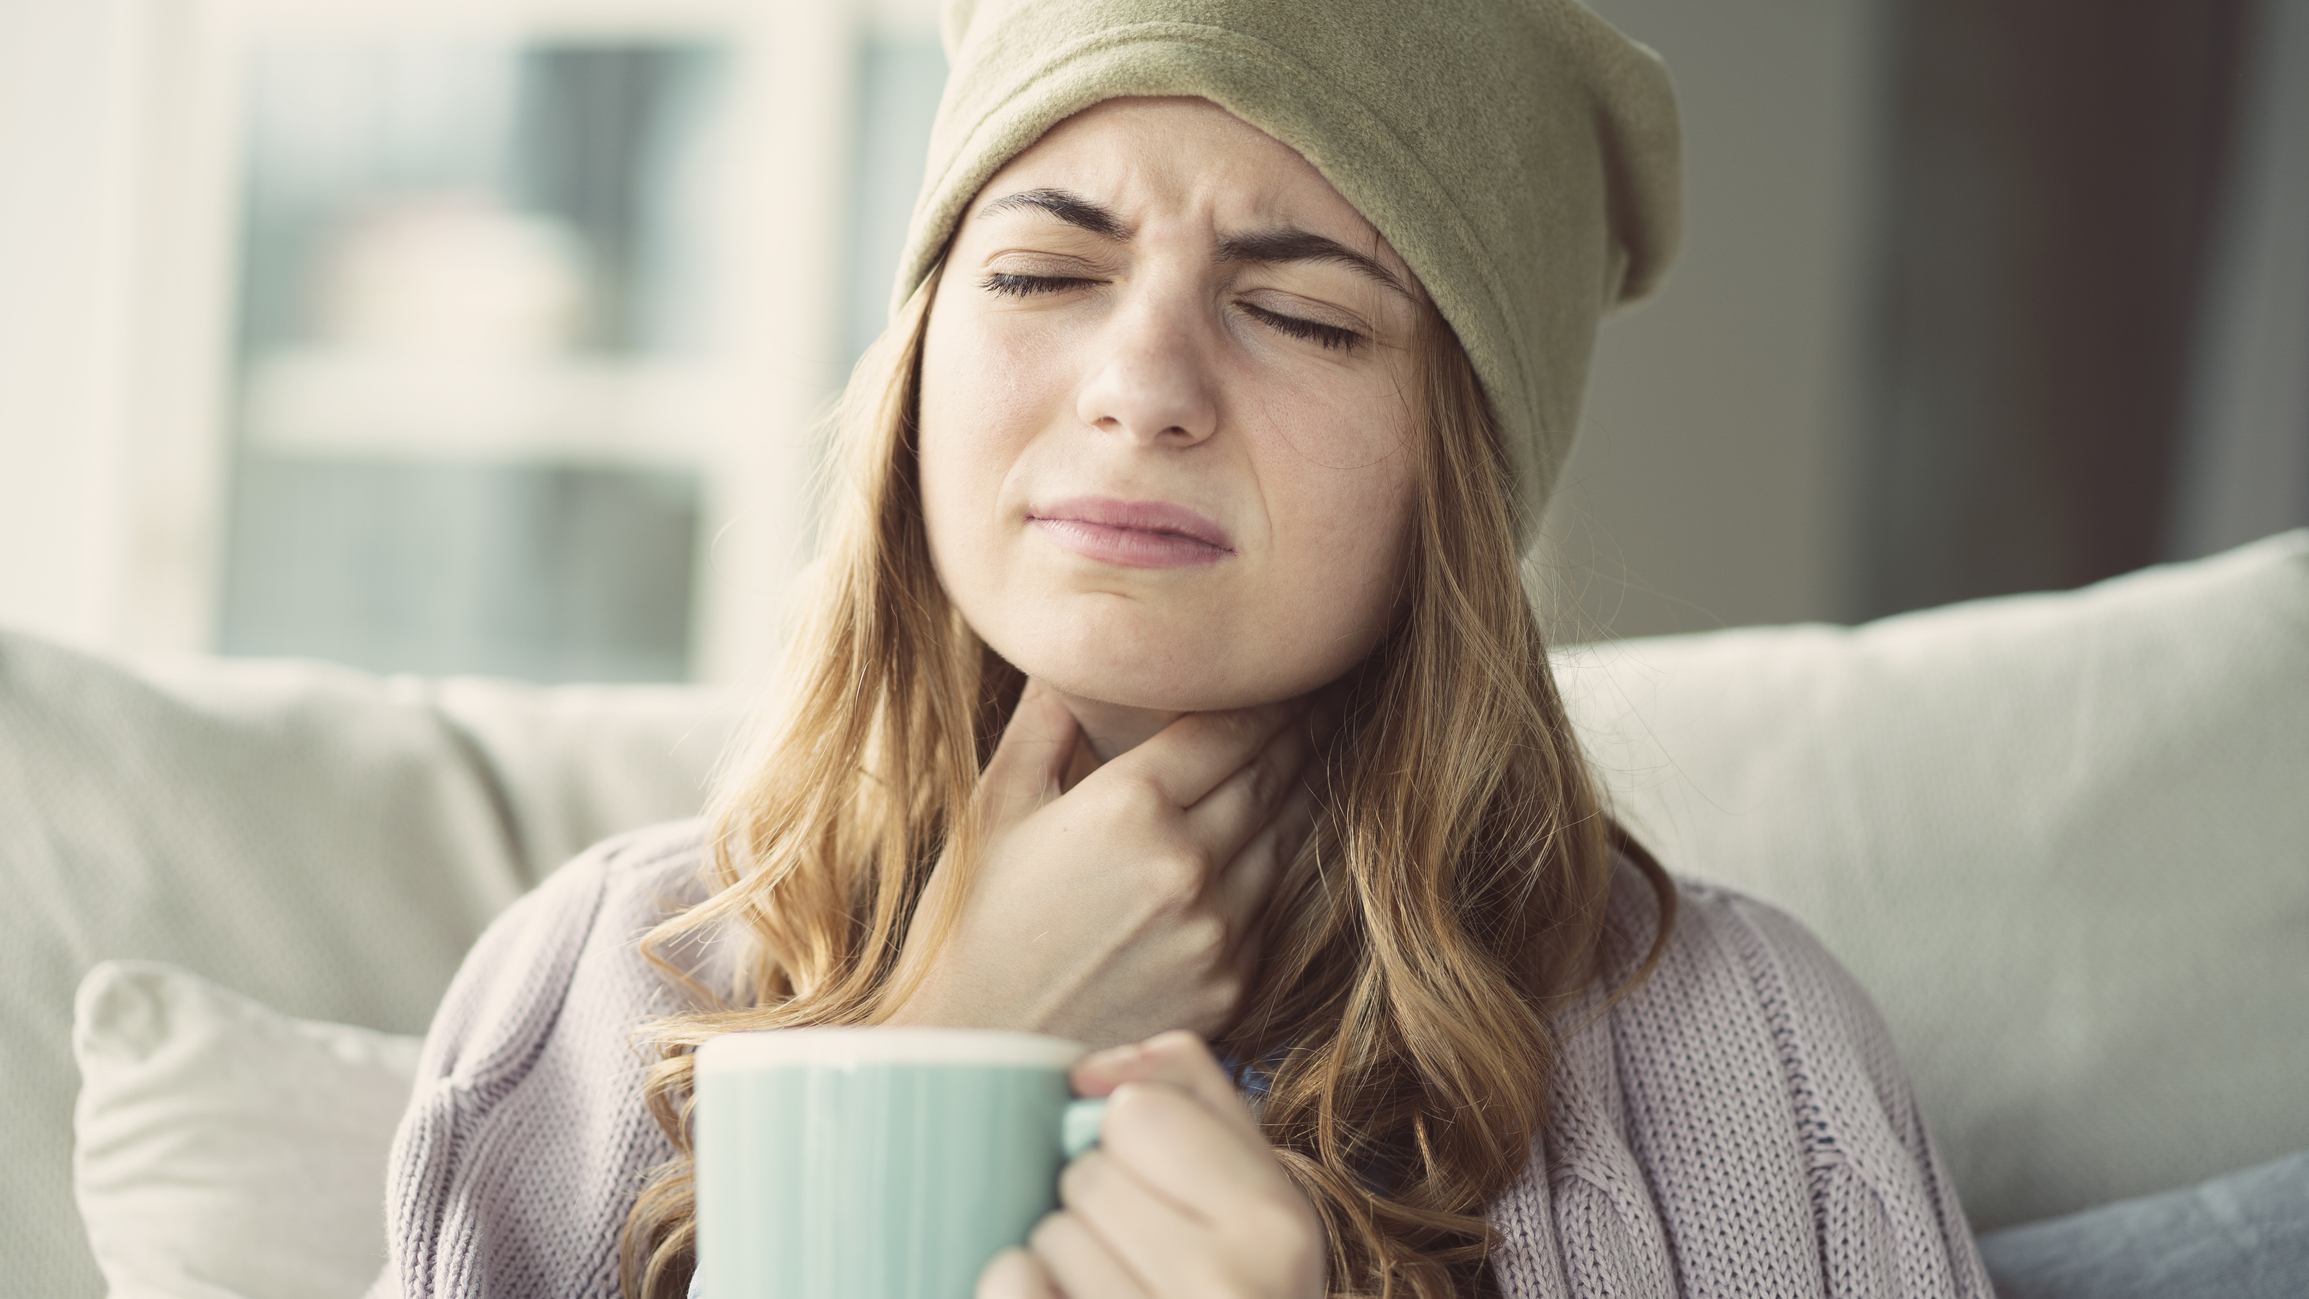 Woman in a hat & sitting on a couch is holding her sore throat with a mug in her other hand